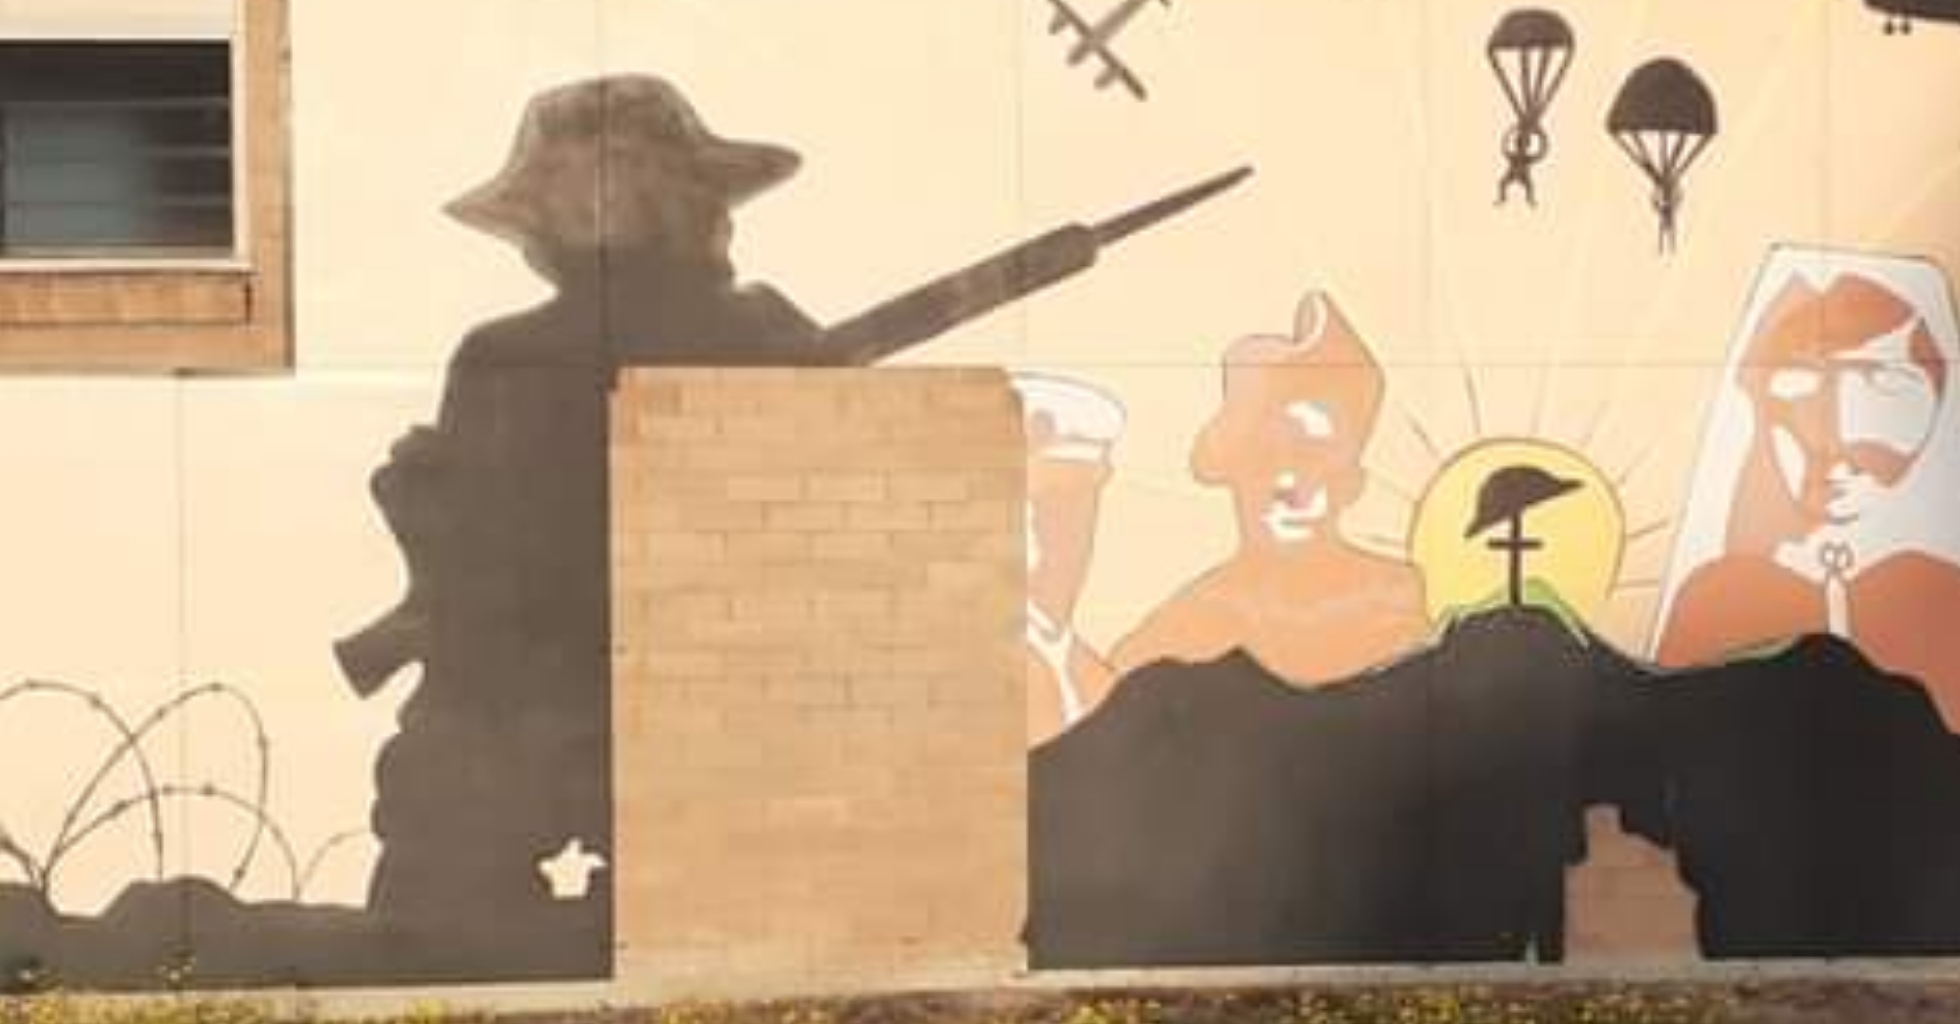 Read more about the article Disgraceful act, ANZAC mural vandalized